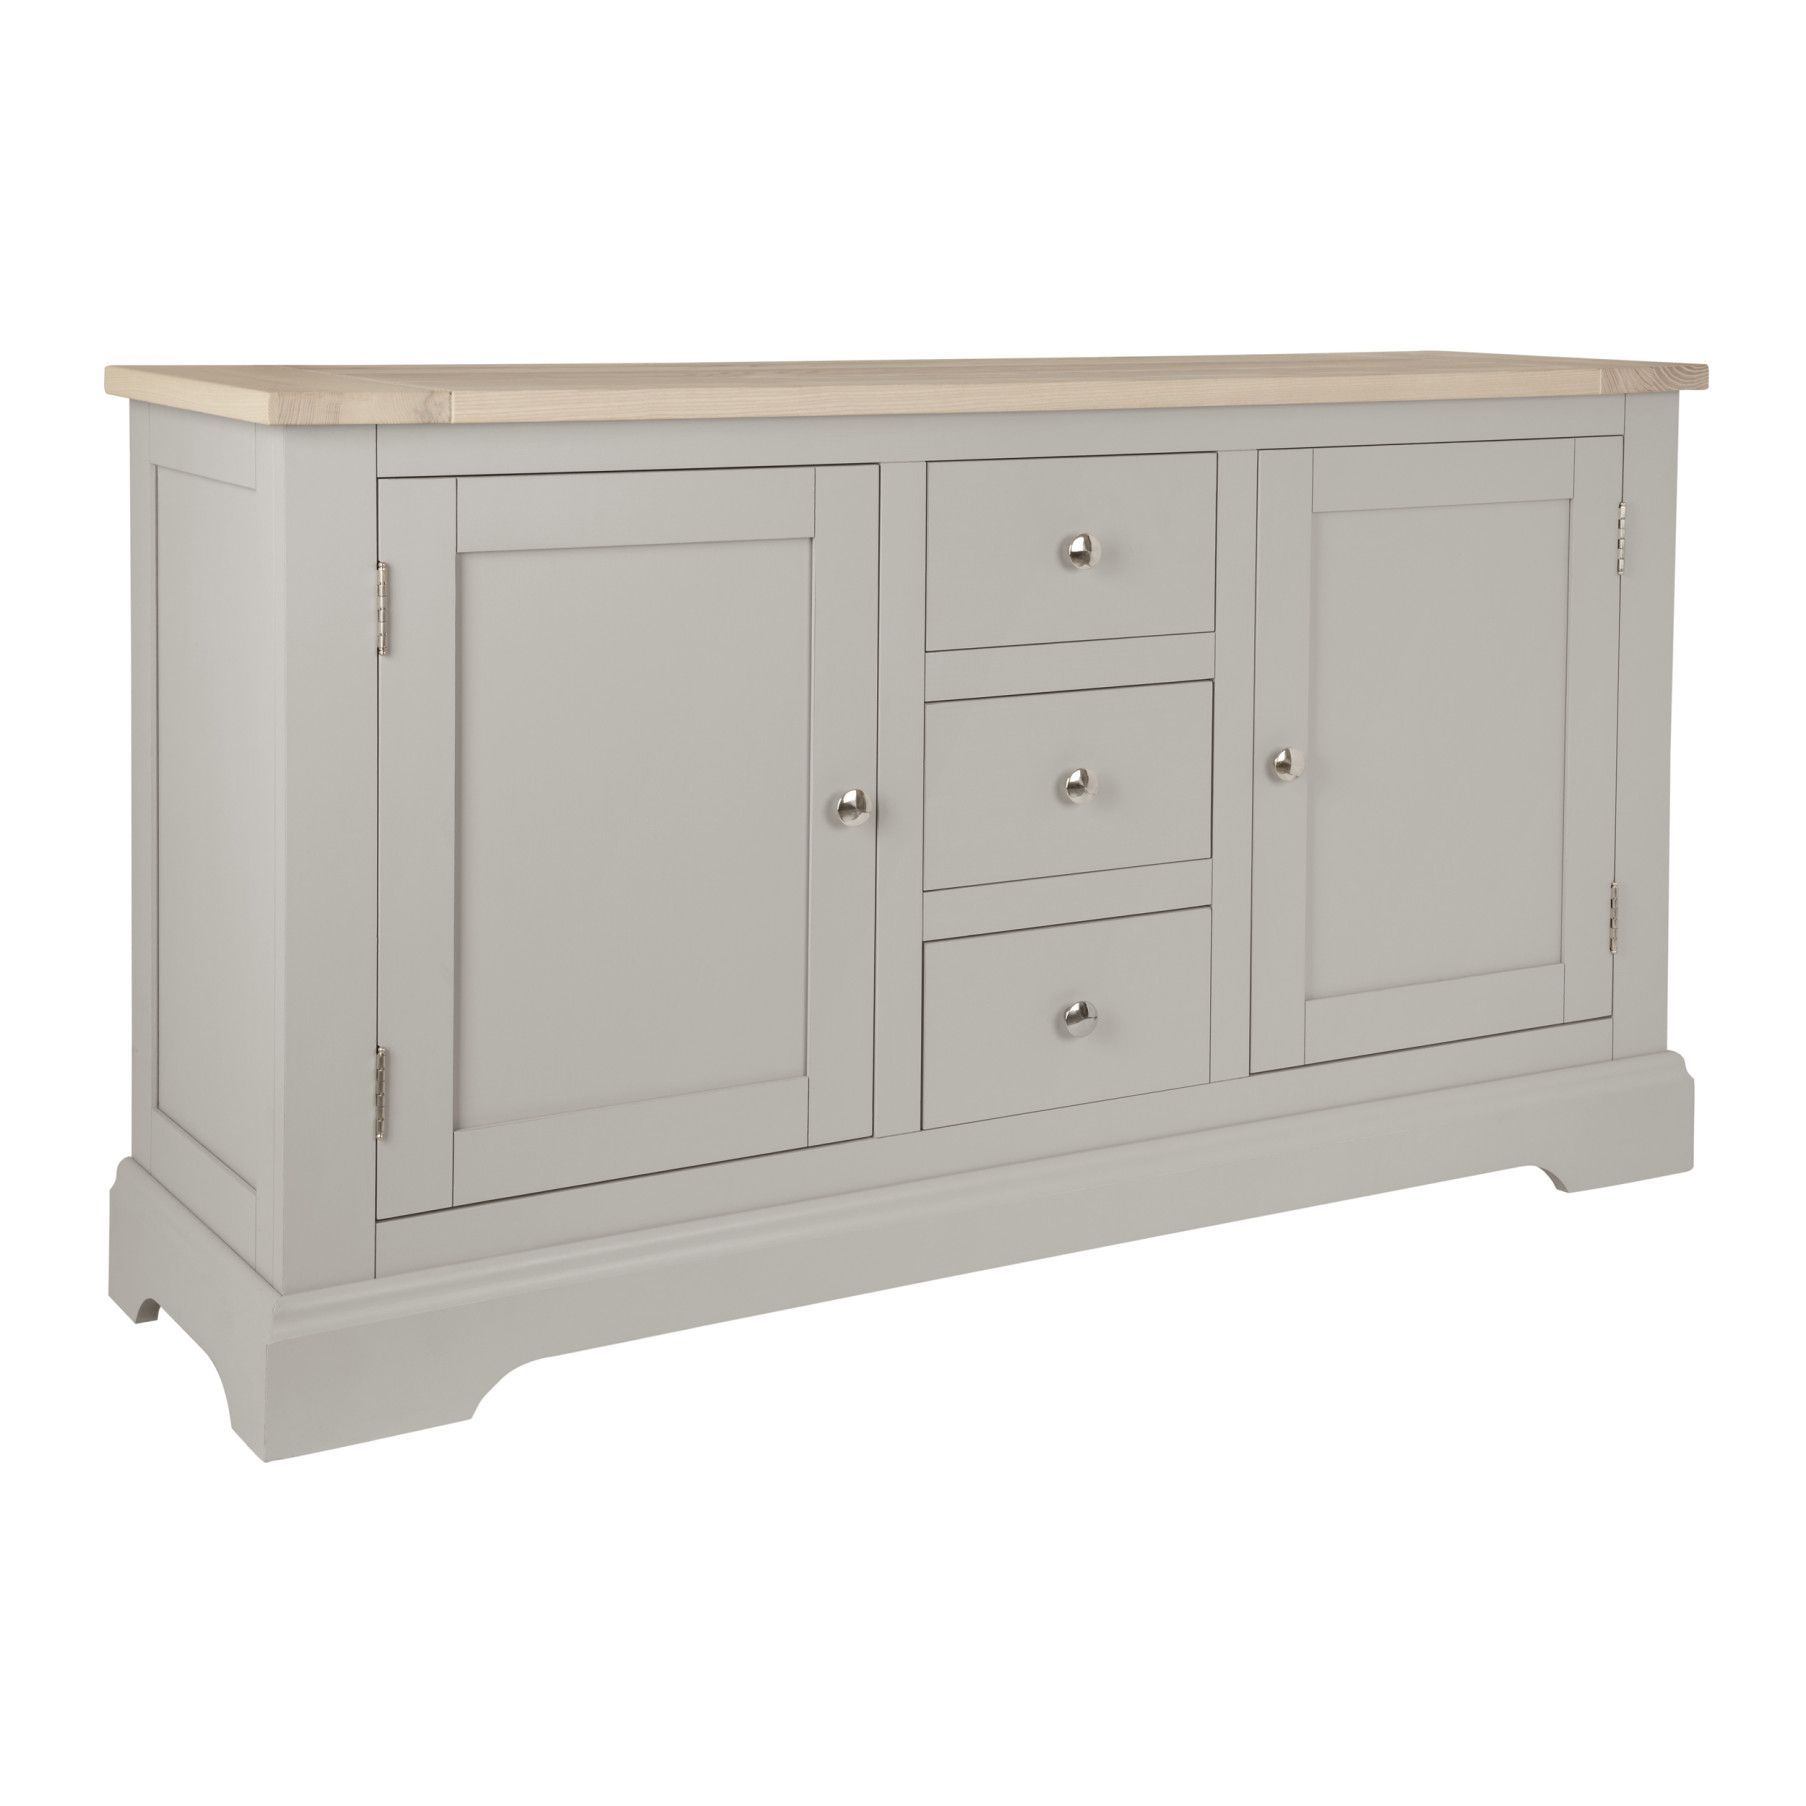 Made To Order Furniture – Dorset Pale French Grey 2 Door 3 Drawer Throughout Most Popular Oil Pale Finish 4 Door Sideboards (View 2 of 20)